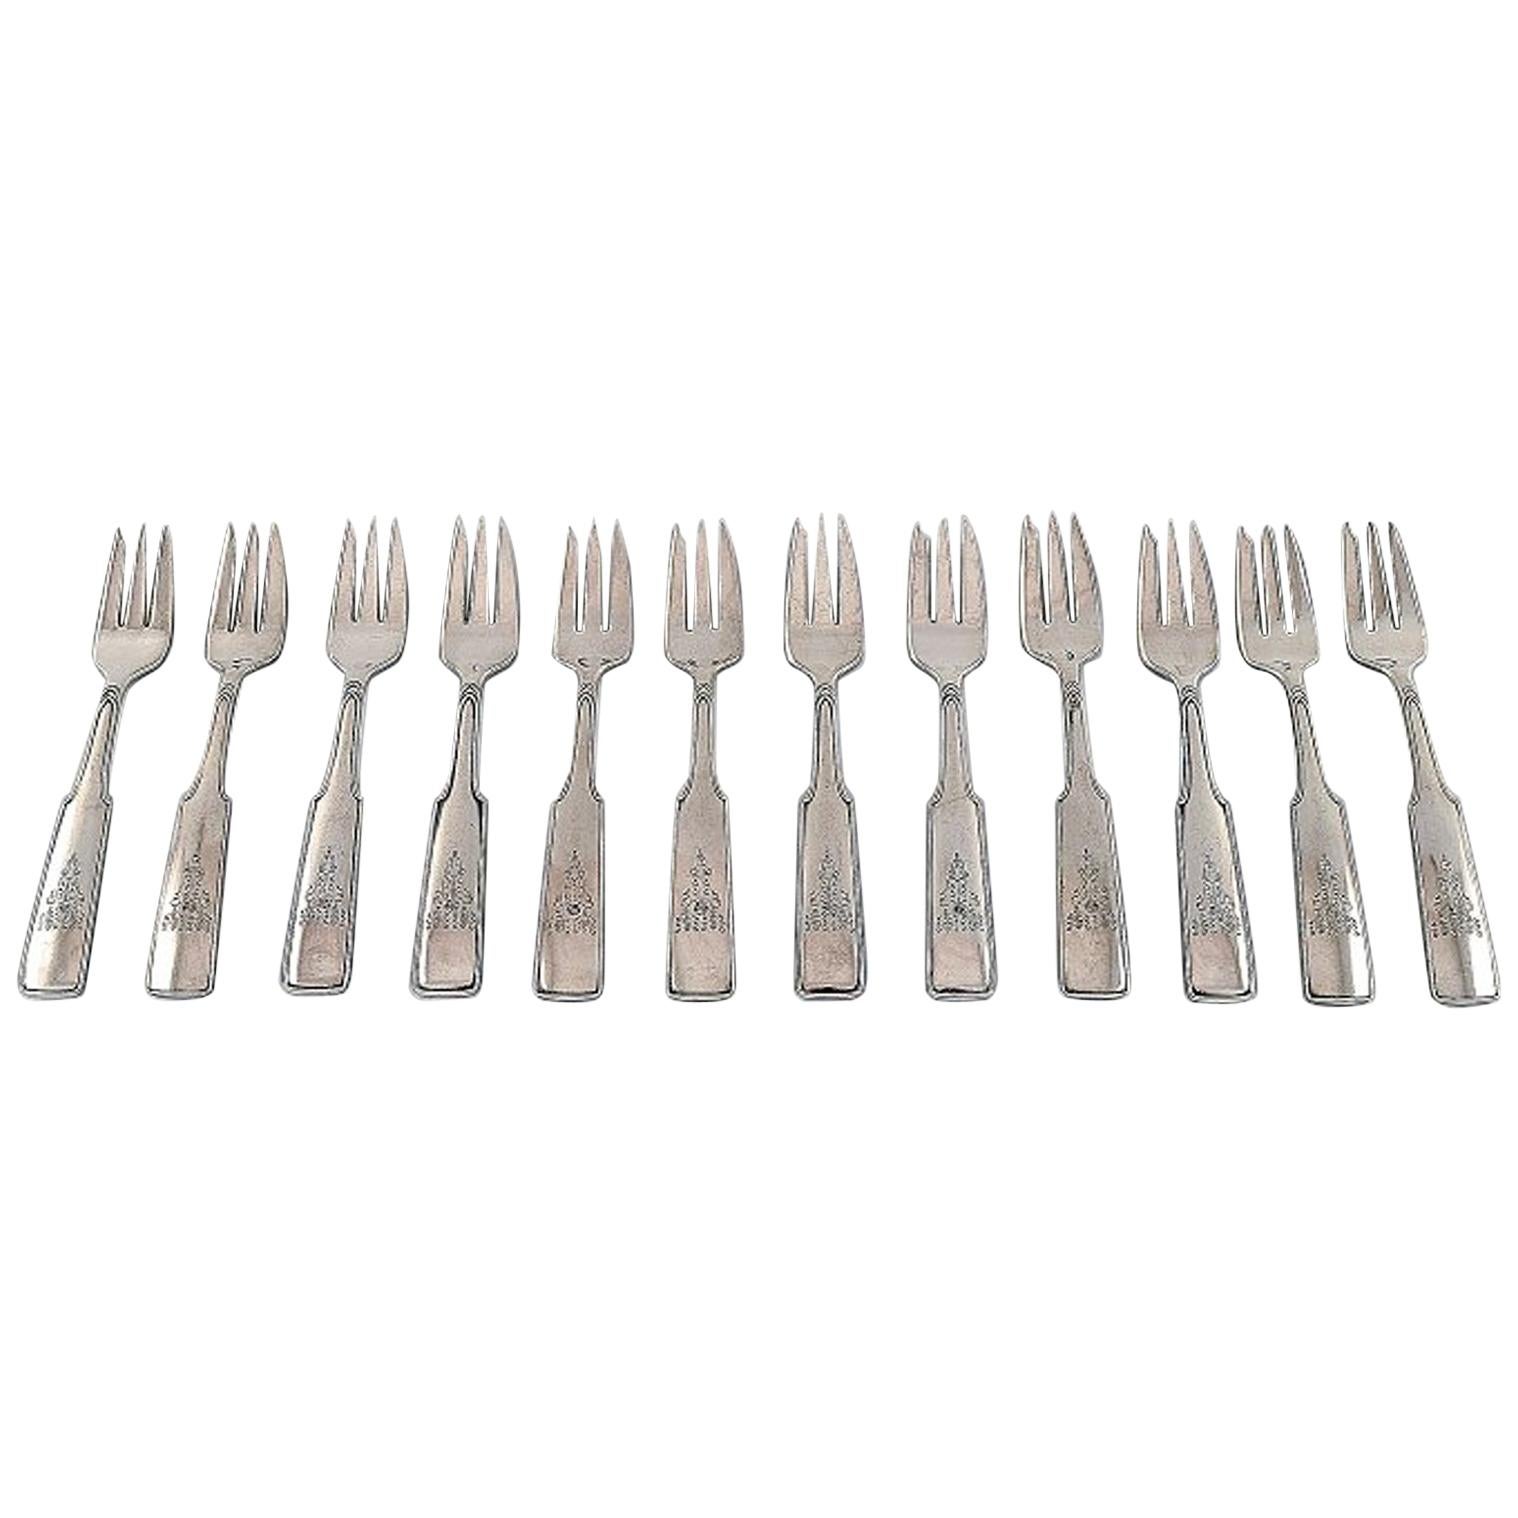 Hans Hansen Silverware Number 2, Set of 12 Pastry Forks in All Silver For Sale